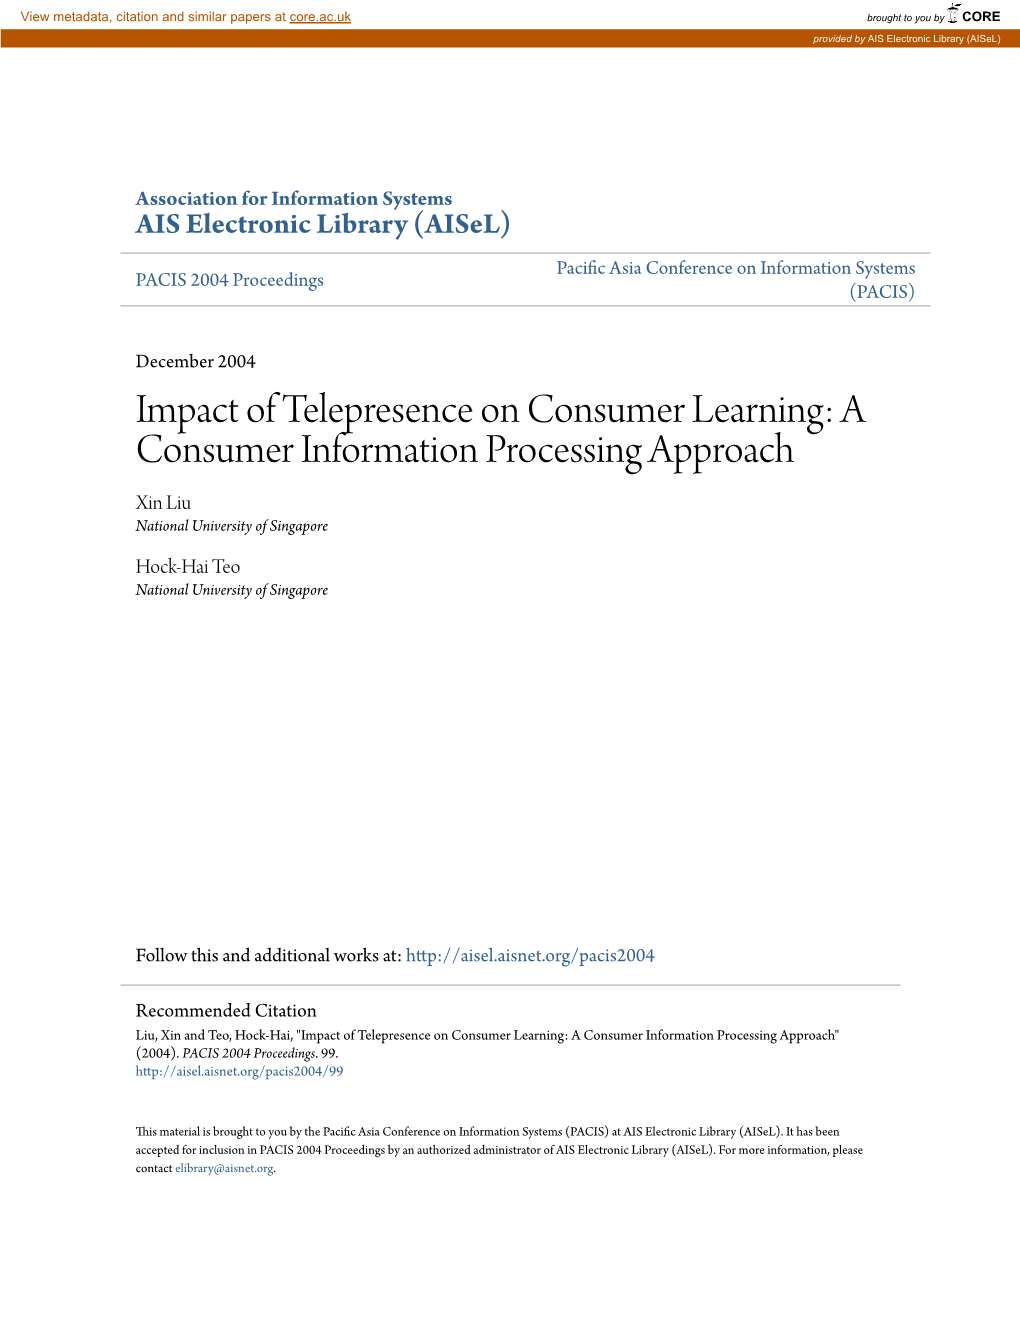 Impact of Telepresence on Consumer Learning: a Consumer Information Processing Approach Xin Liu National University of Singapore